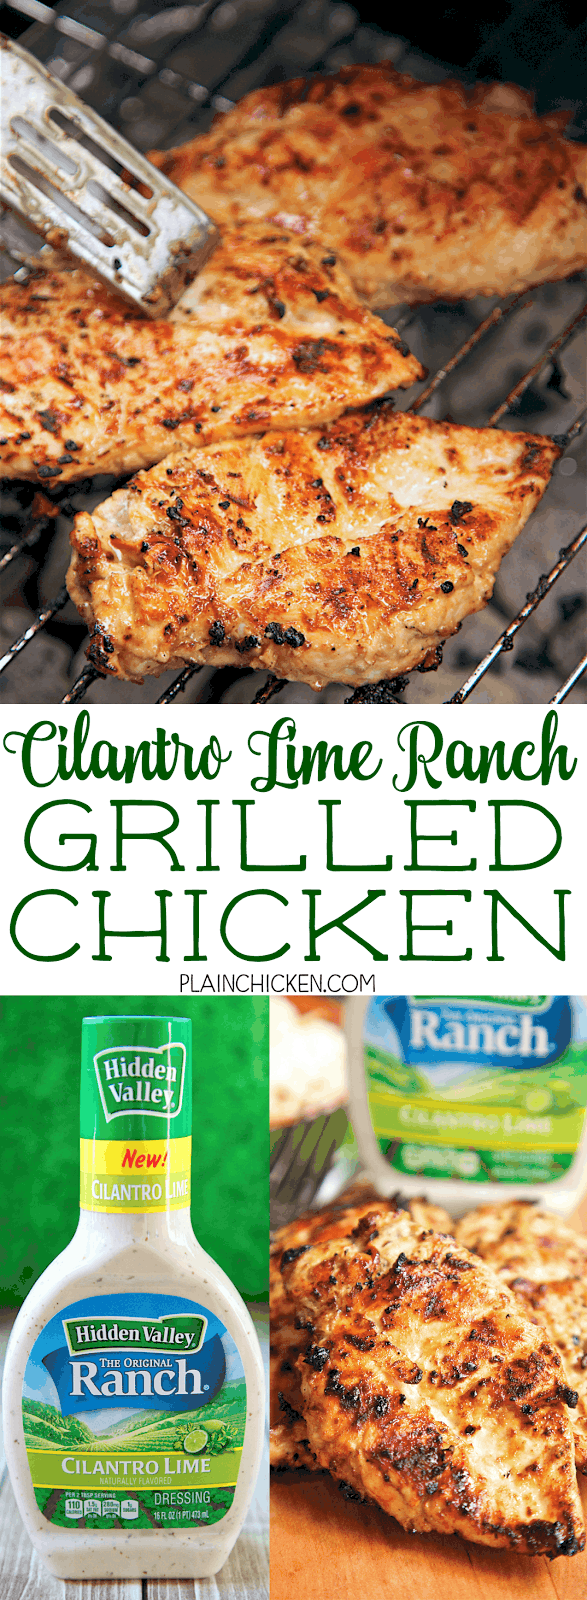 Cilantro Lime Ranch Grilled Chicken - cilantro lime ranch dressing, olive oil, cumin, lime juice, vinegar and worcestershire sauce. Only takes a minute to whisk up the marinade. Let the chicken sit in the marinade all day and grill the chicken for dinner. Crazy good! Would also be great in fajitas!!